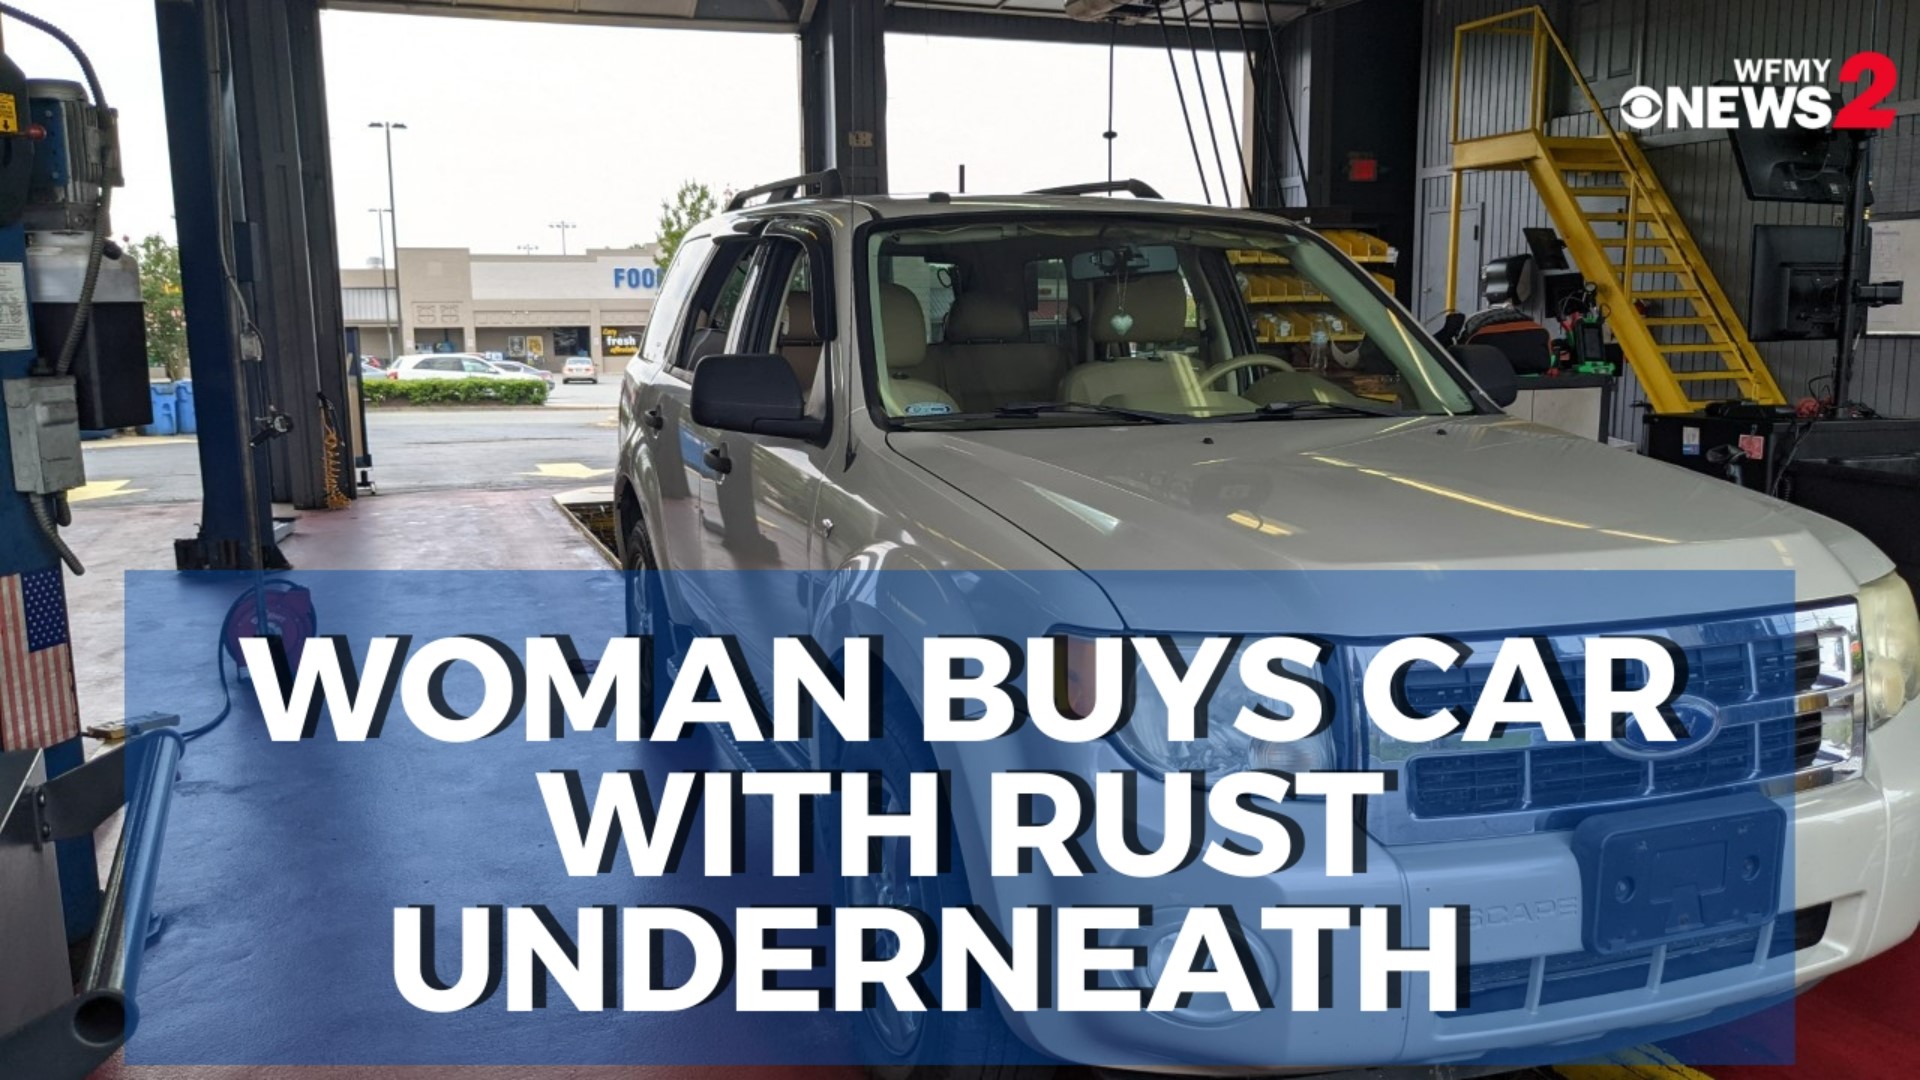 Mechanics told Michelle Craft repairs could cost $5,000 to fix the rust under her car.